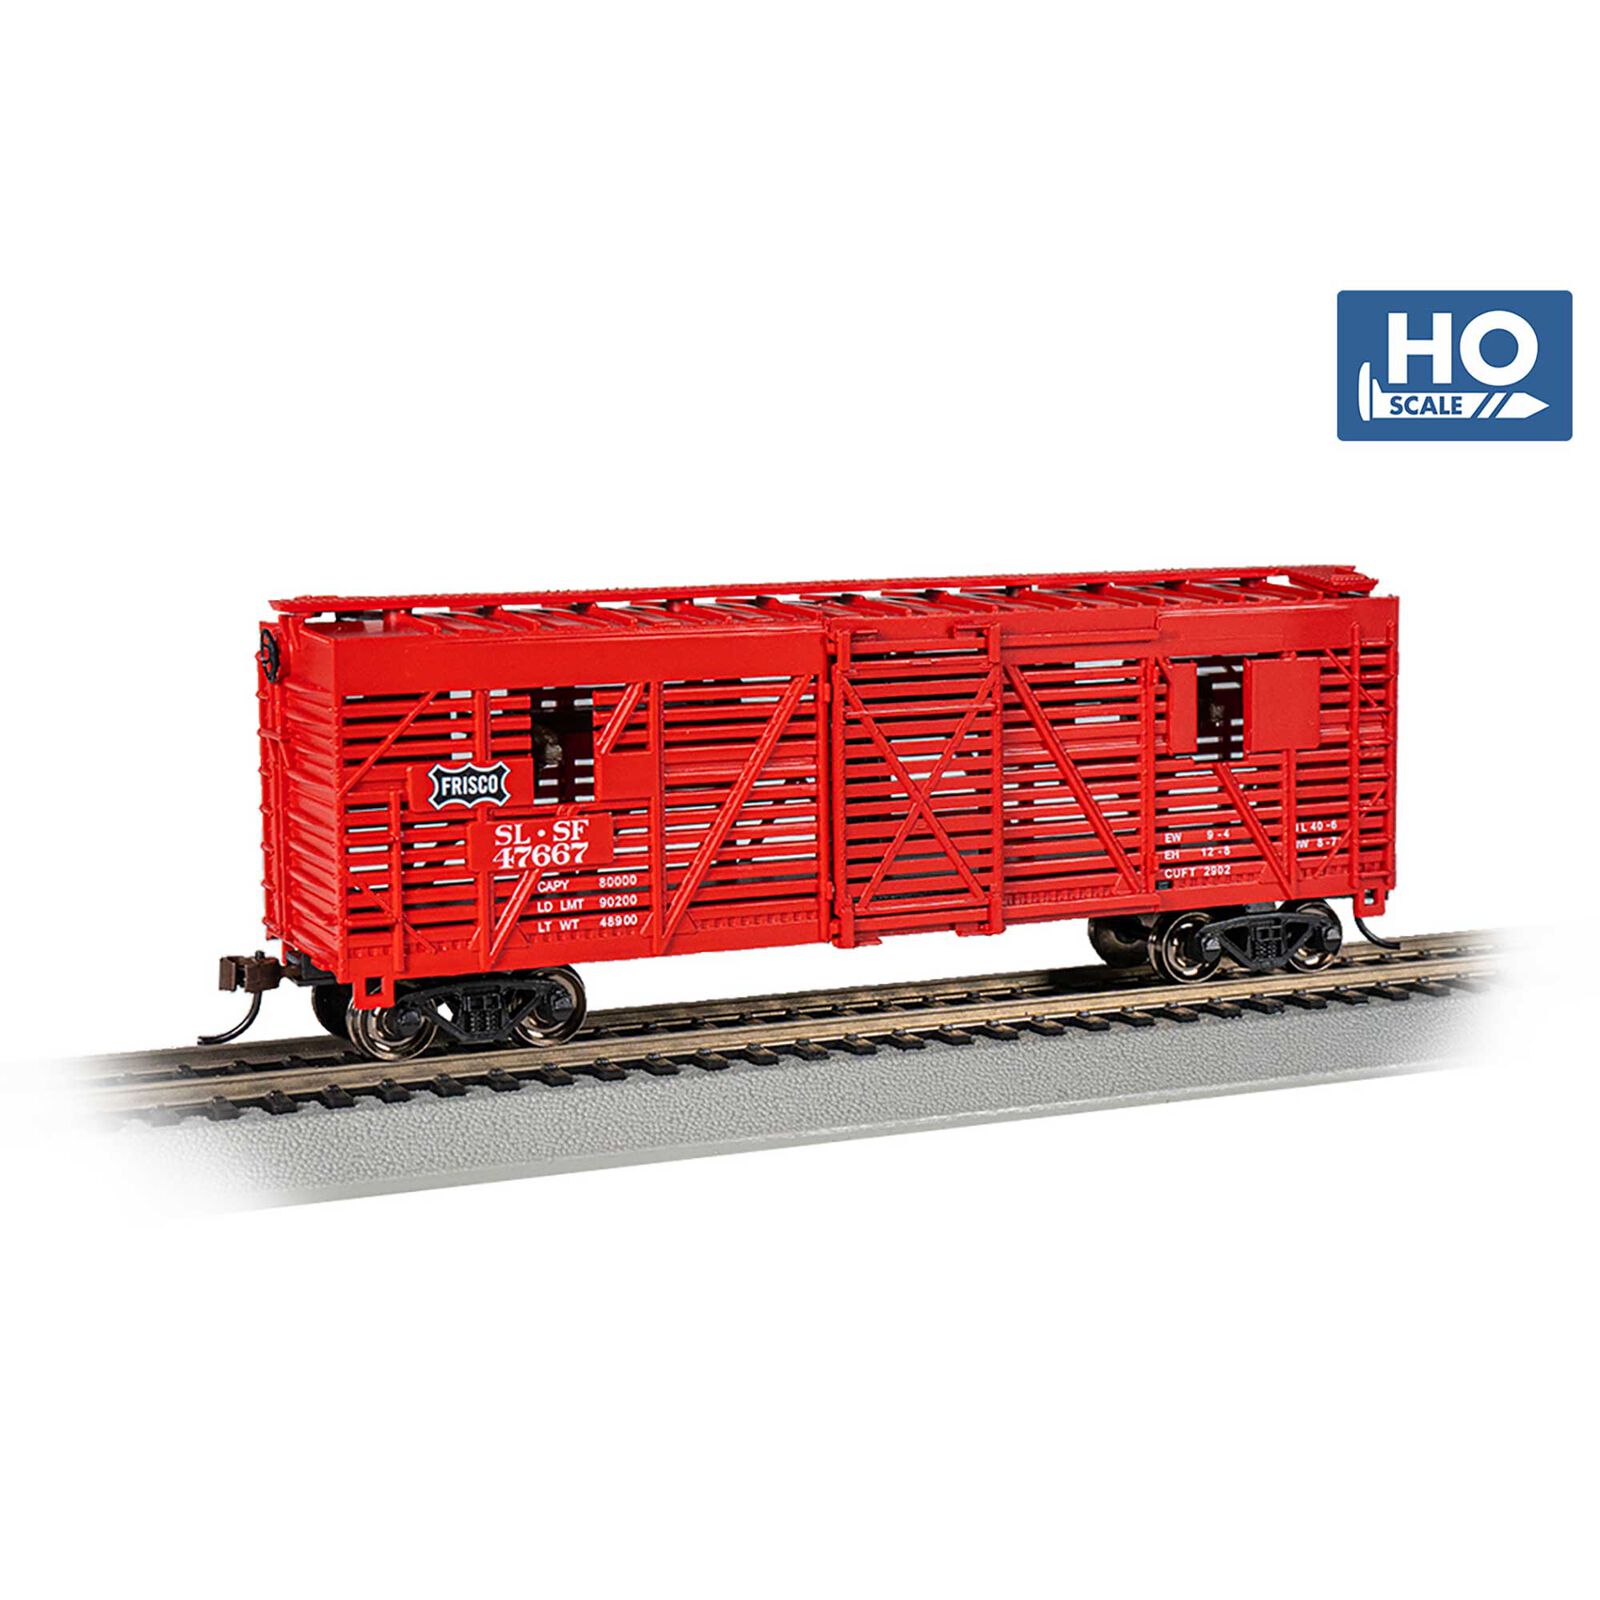 HO STOCK CAR FRISCO #47667 with CATTLE